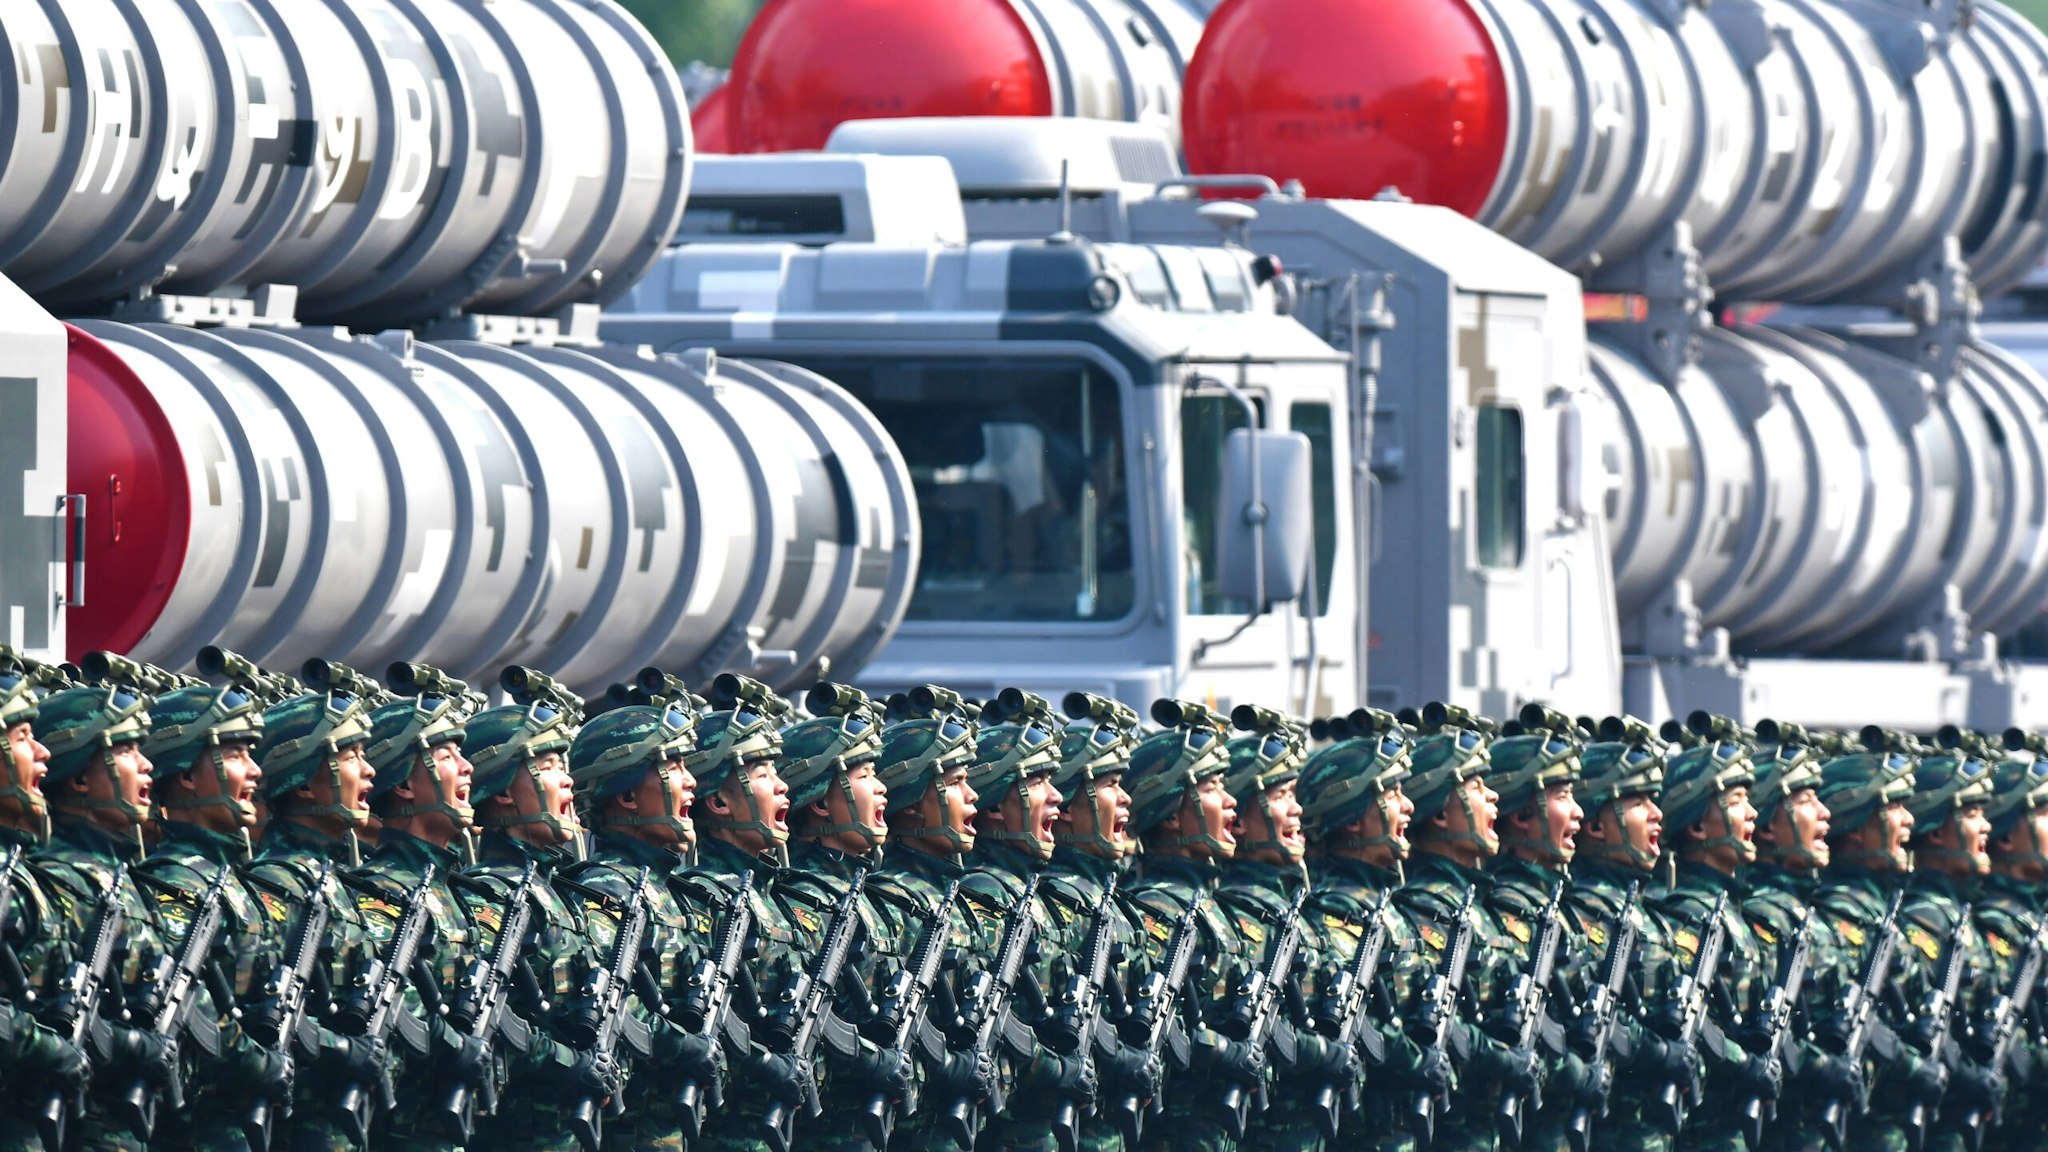 BEIJING, Oct. 1, 2019 -- Troops take part in a military parade celebrating the 70th founding anniversary of the People's Republic of China in Beijing, capital of China, Oct. 1, 2019.